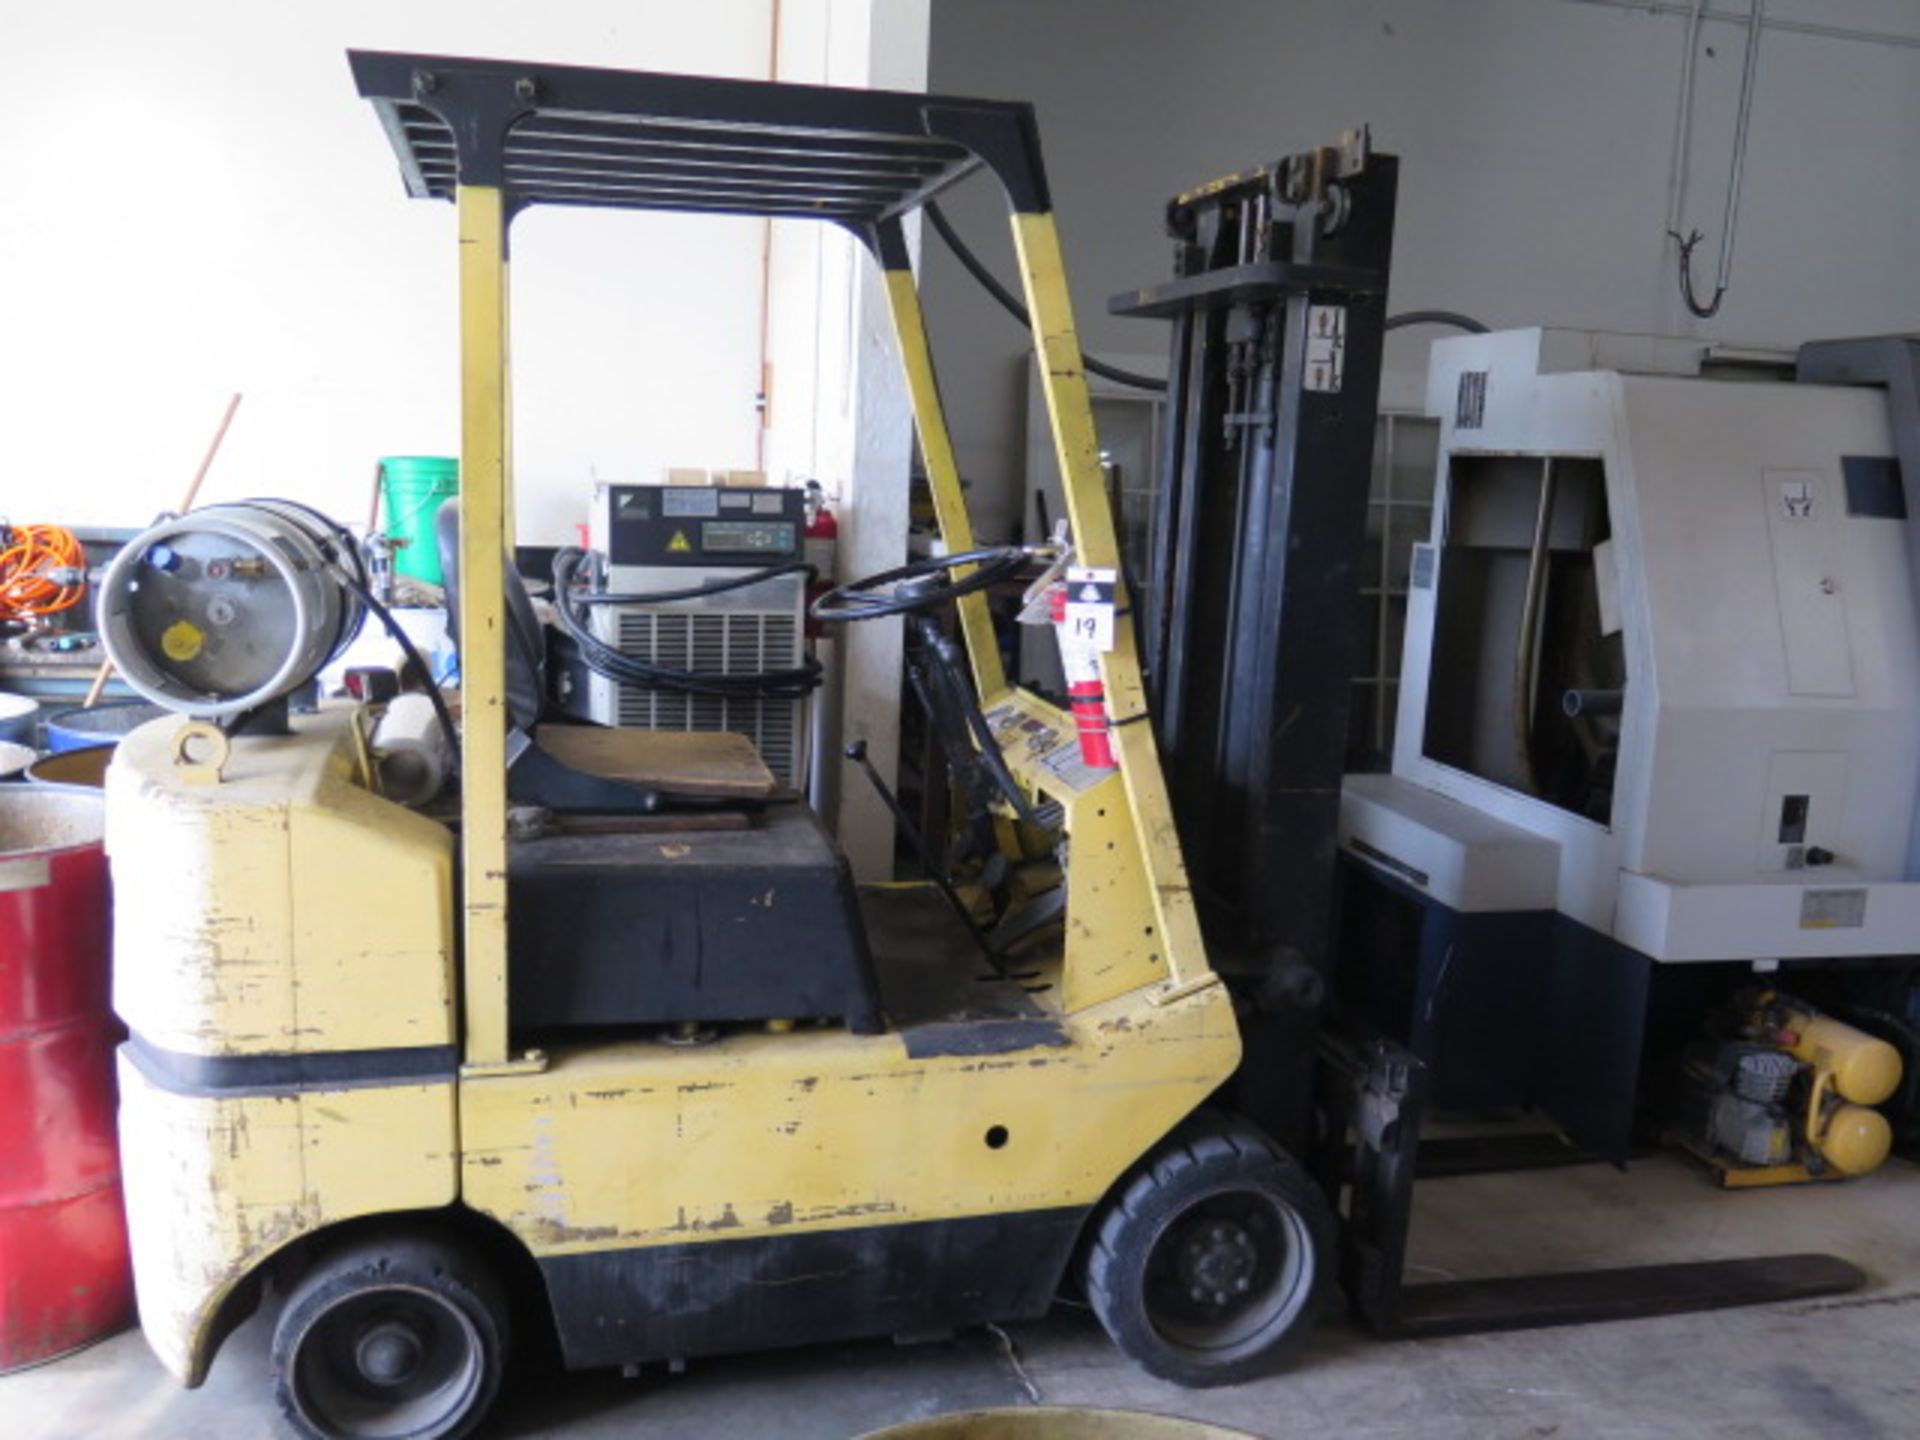 TCM FCG25N5 5000 Lb LPG Forklift s/n 3181144 w/ 2-Stage, 130” Lift Height, Solid Tires, SOLD AS IS